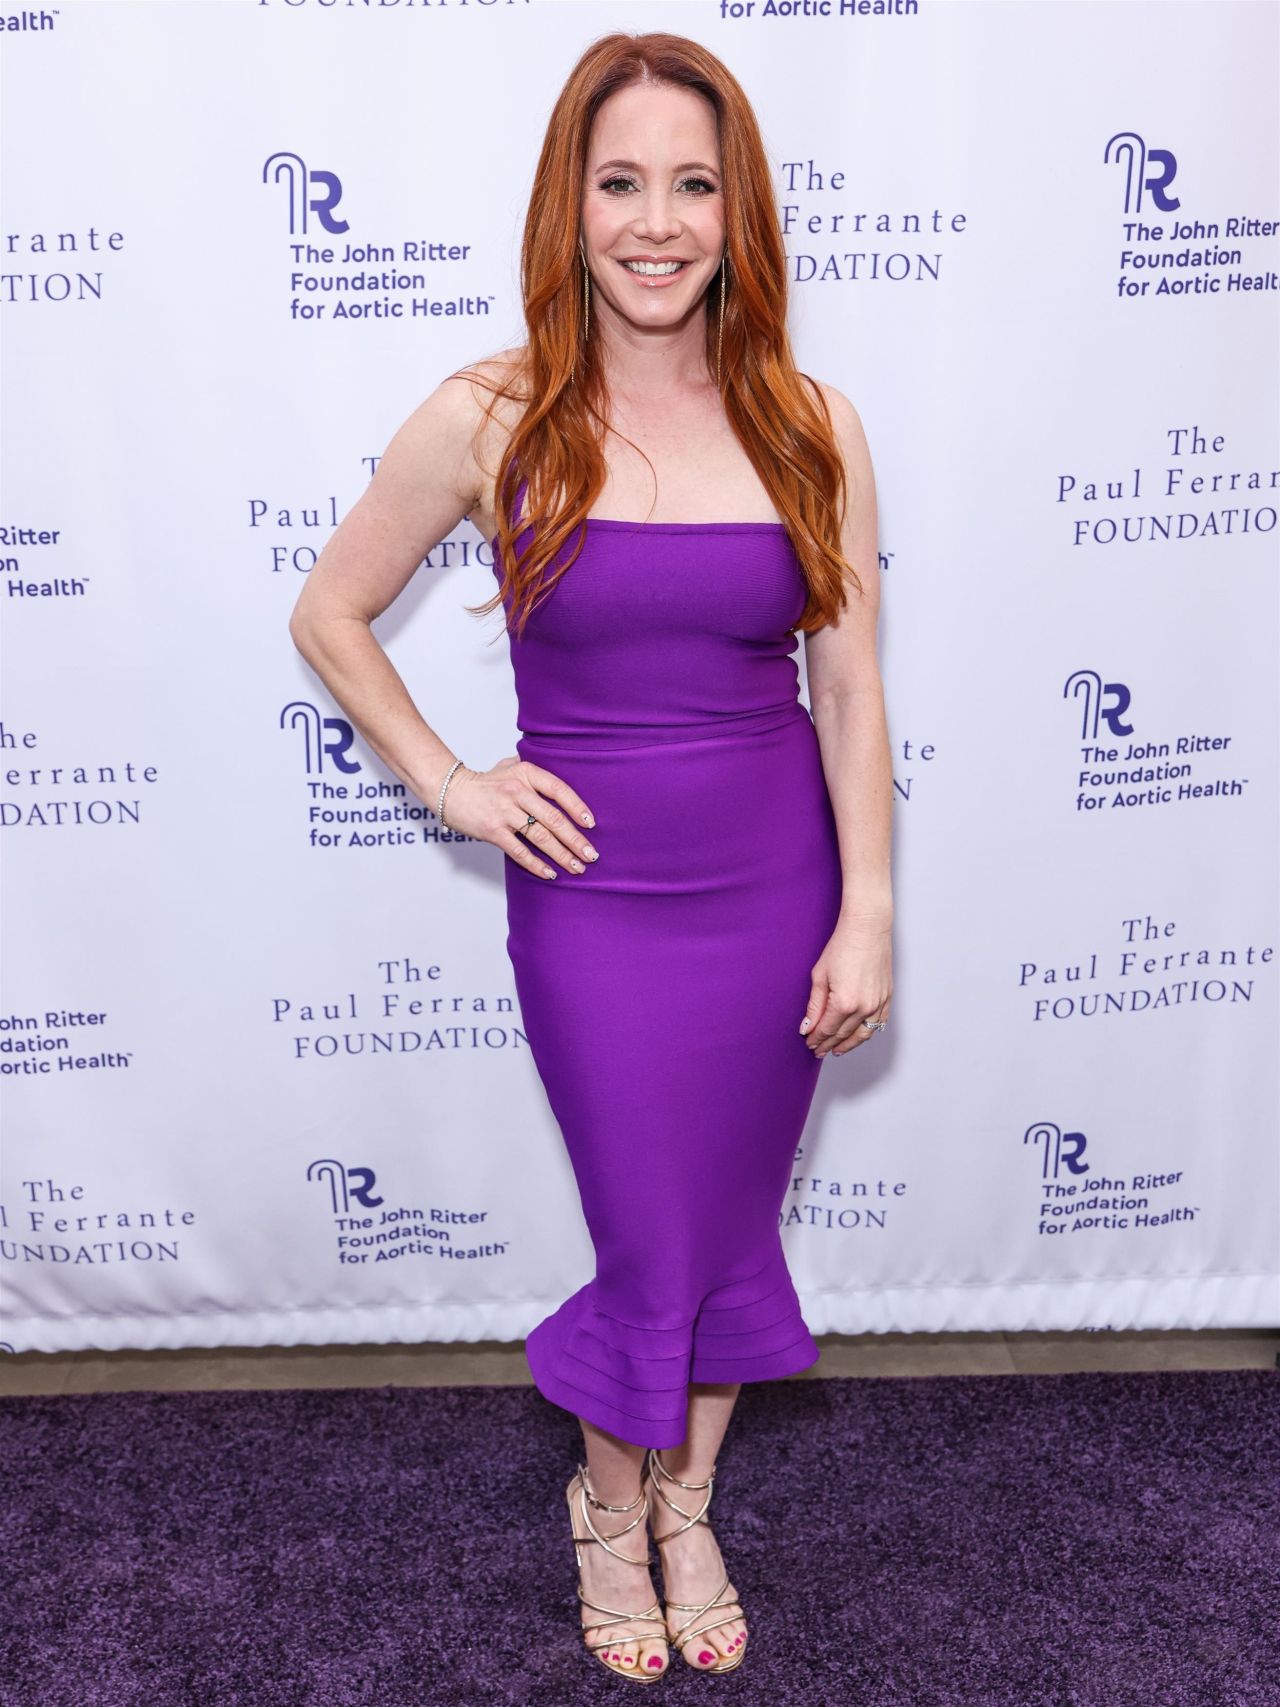 AMY DAVIDSON AT THE JOHN RITTER FOUNDATION FOR AORTIC HEALTH IN LOS ANGELES